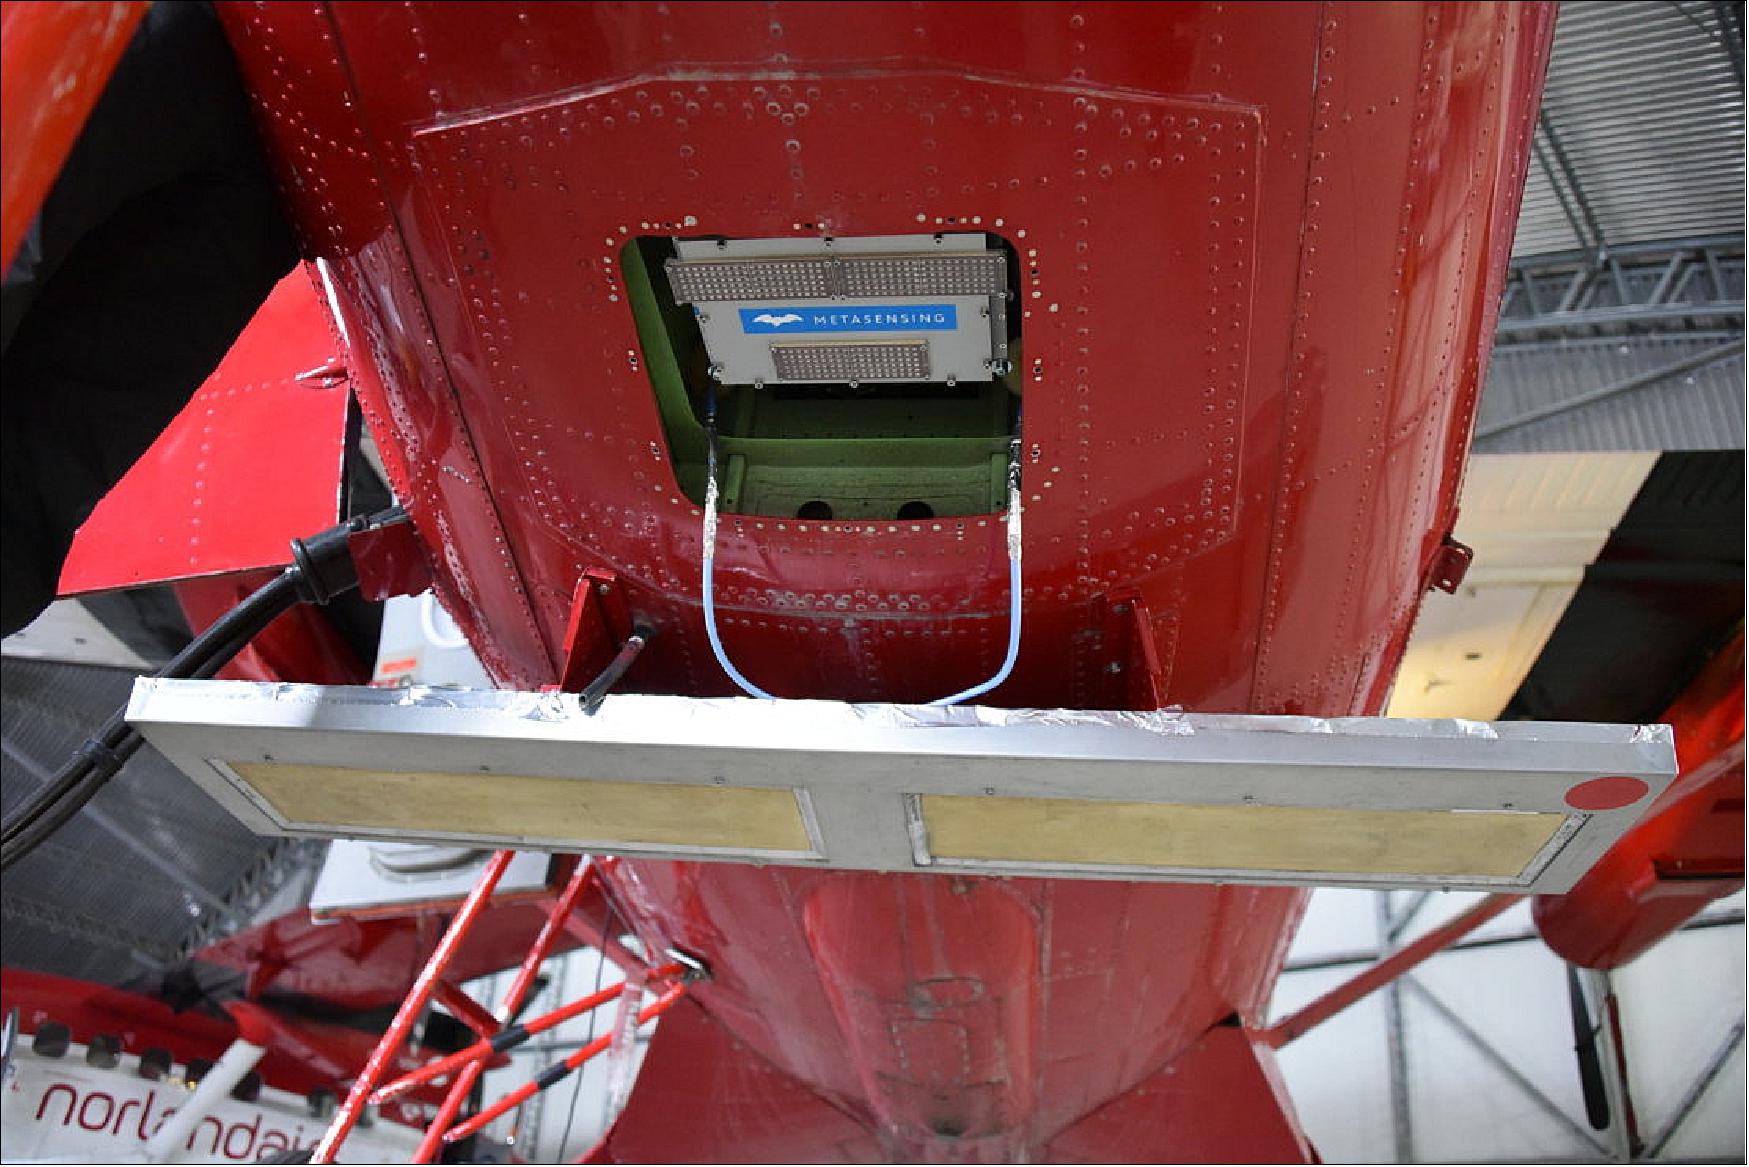 Figure 54: Two antennas under the fuselage of the Twin Otter plane can be seen in this photograph. The bigger antenna (lower part of the image) belongs to the AS IRAS instrument and measures at Ku-band, the same frequency as that of CryoSat-2. The smaller antenna within the fuselage hole was built by MetaSensing BV and uses the higher-frequency Ka-band. Future dual-frequency satellites, which exist only on the drawing board at the moment, can be simulated from the air by combining the frequencies. The concept is being tested as part of an experiment campaign in the Arctic (image credit: ESA) 62)